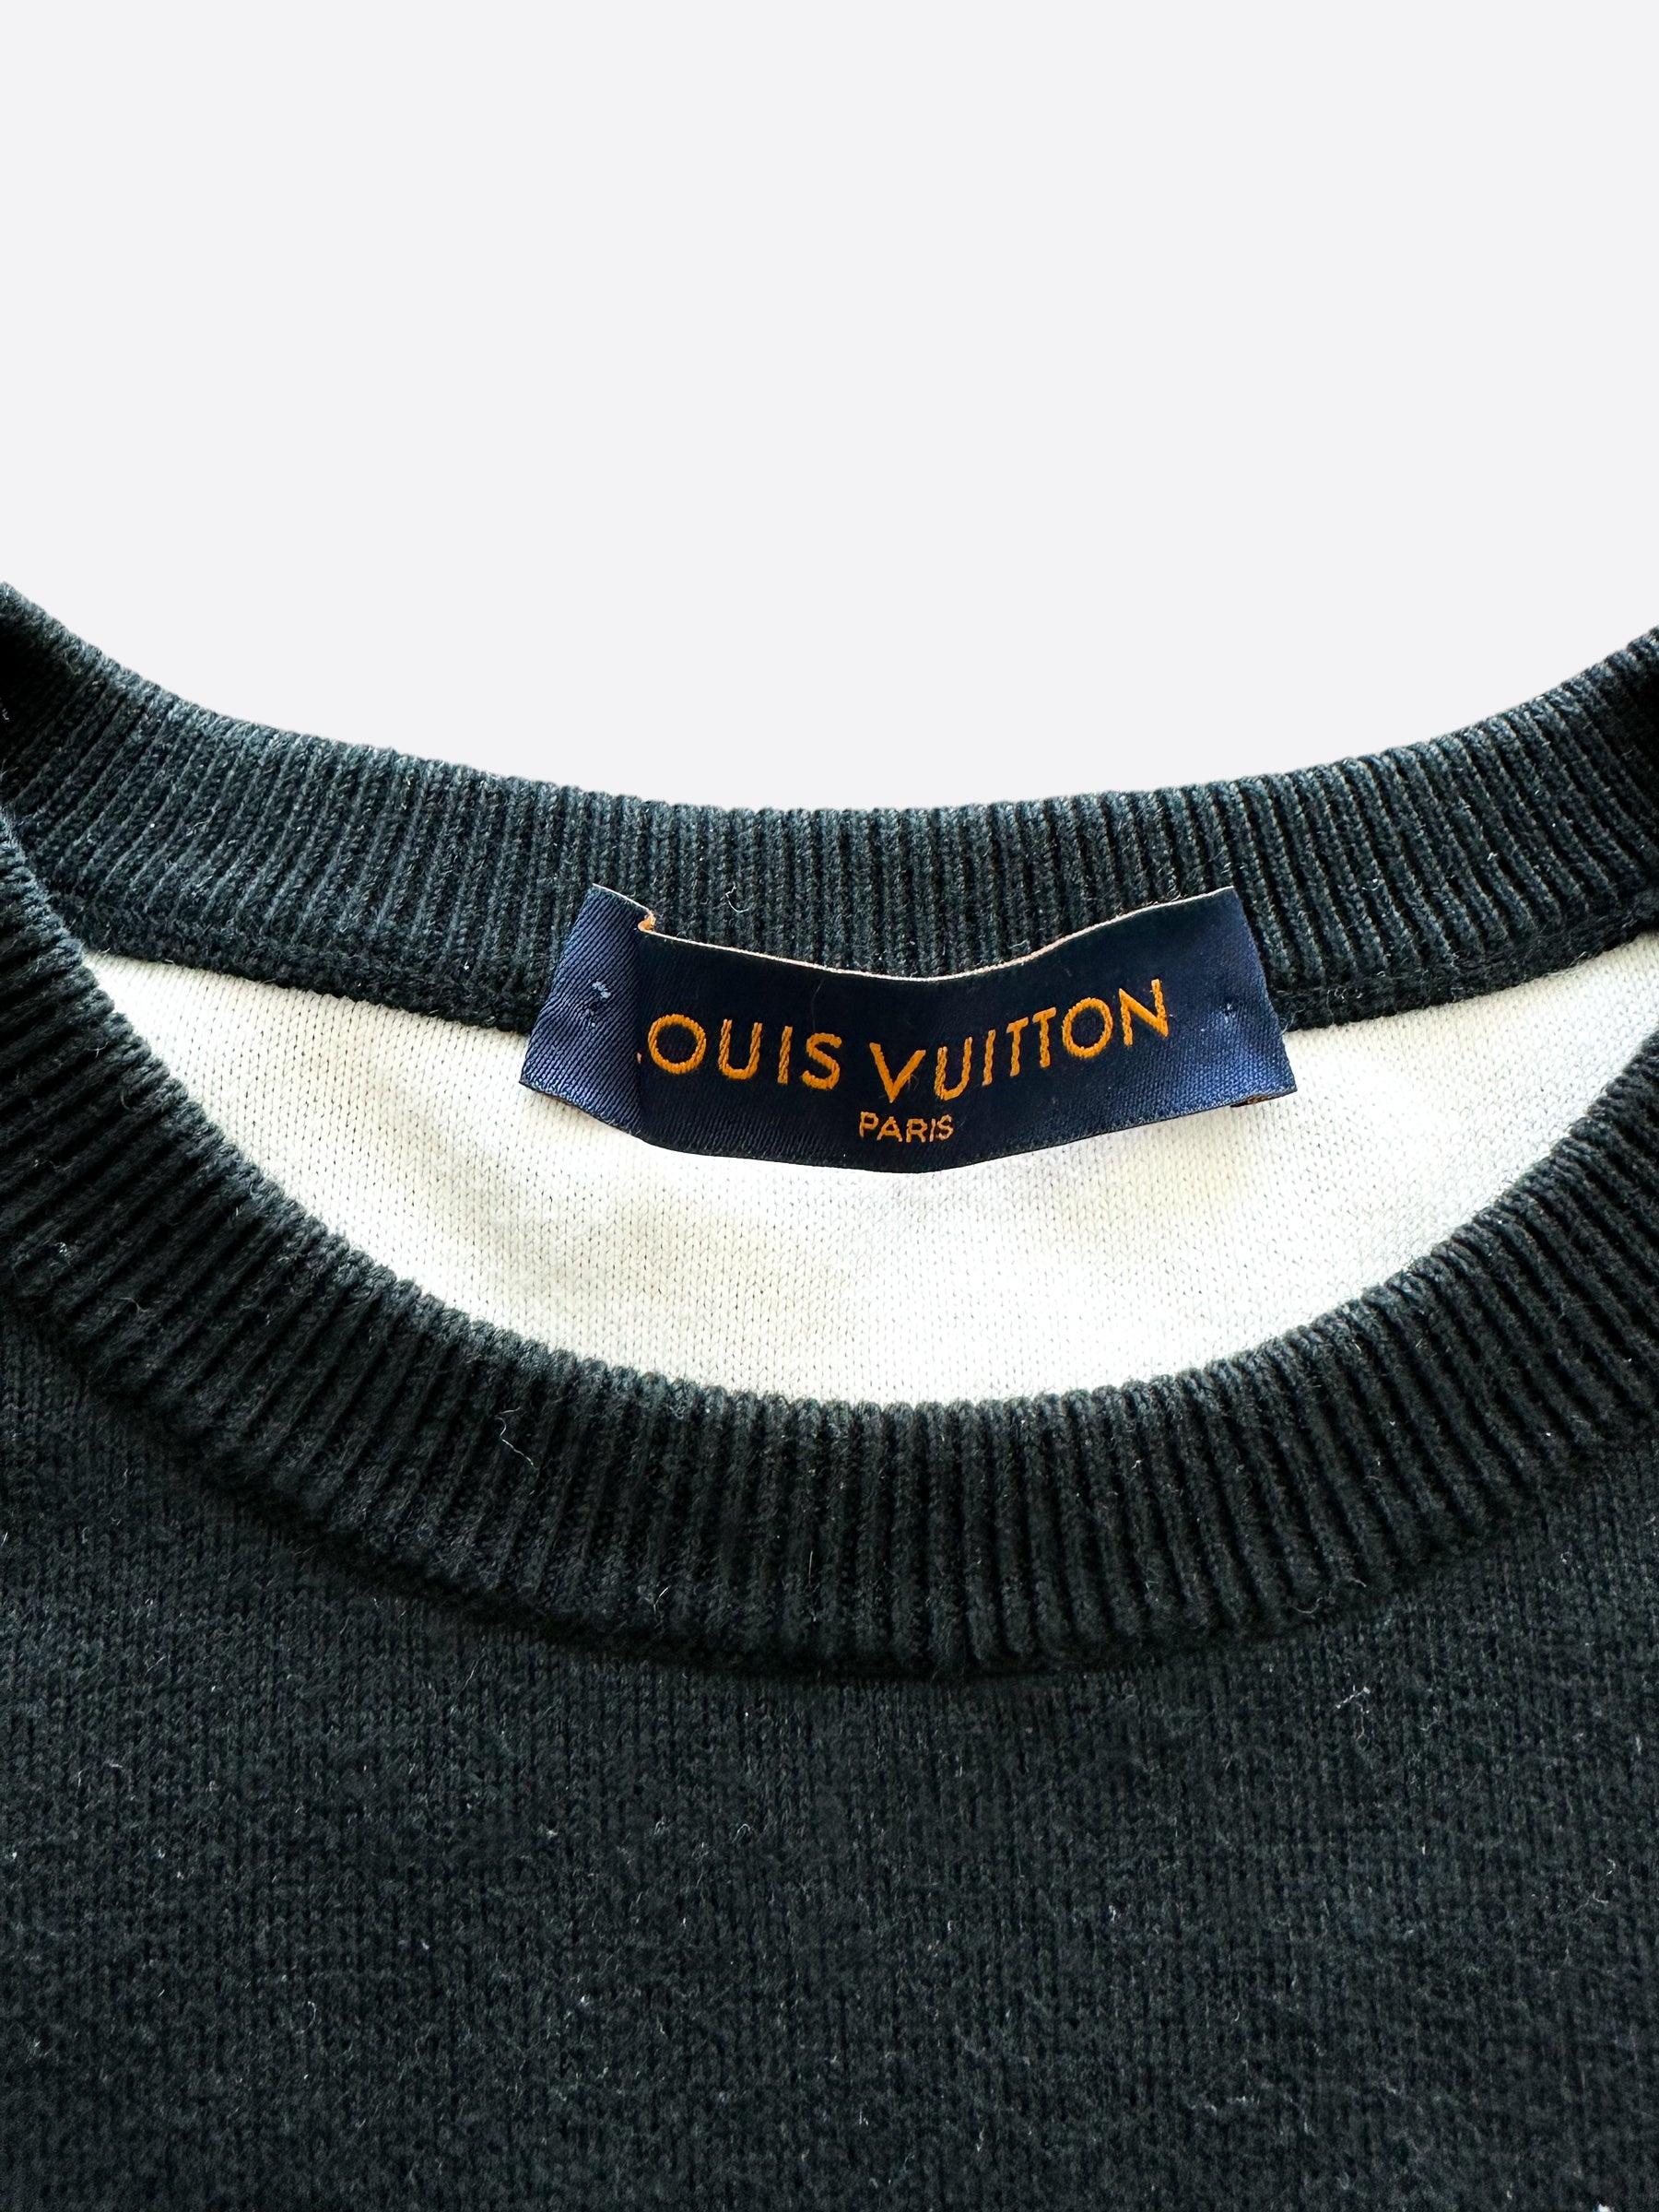 Louis Vuitton 2022 LV Monogram Pullover w/ Tags - Black Sweaters